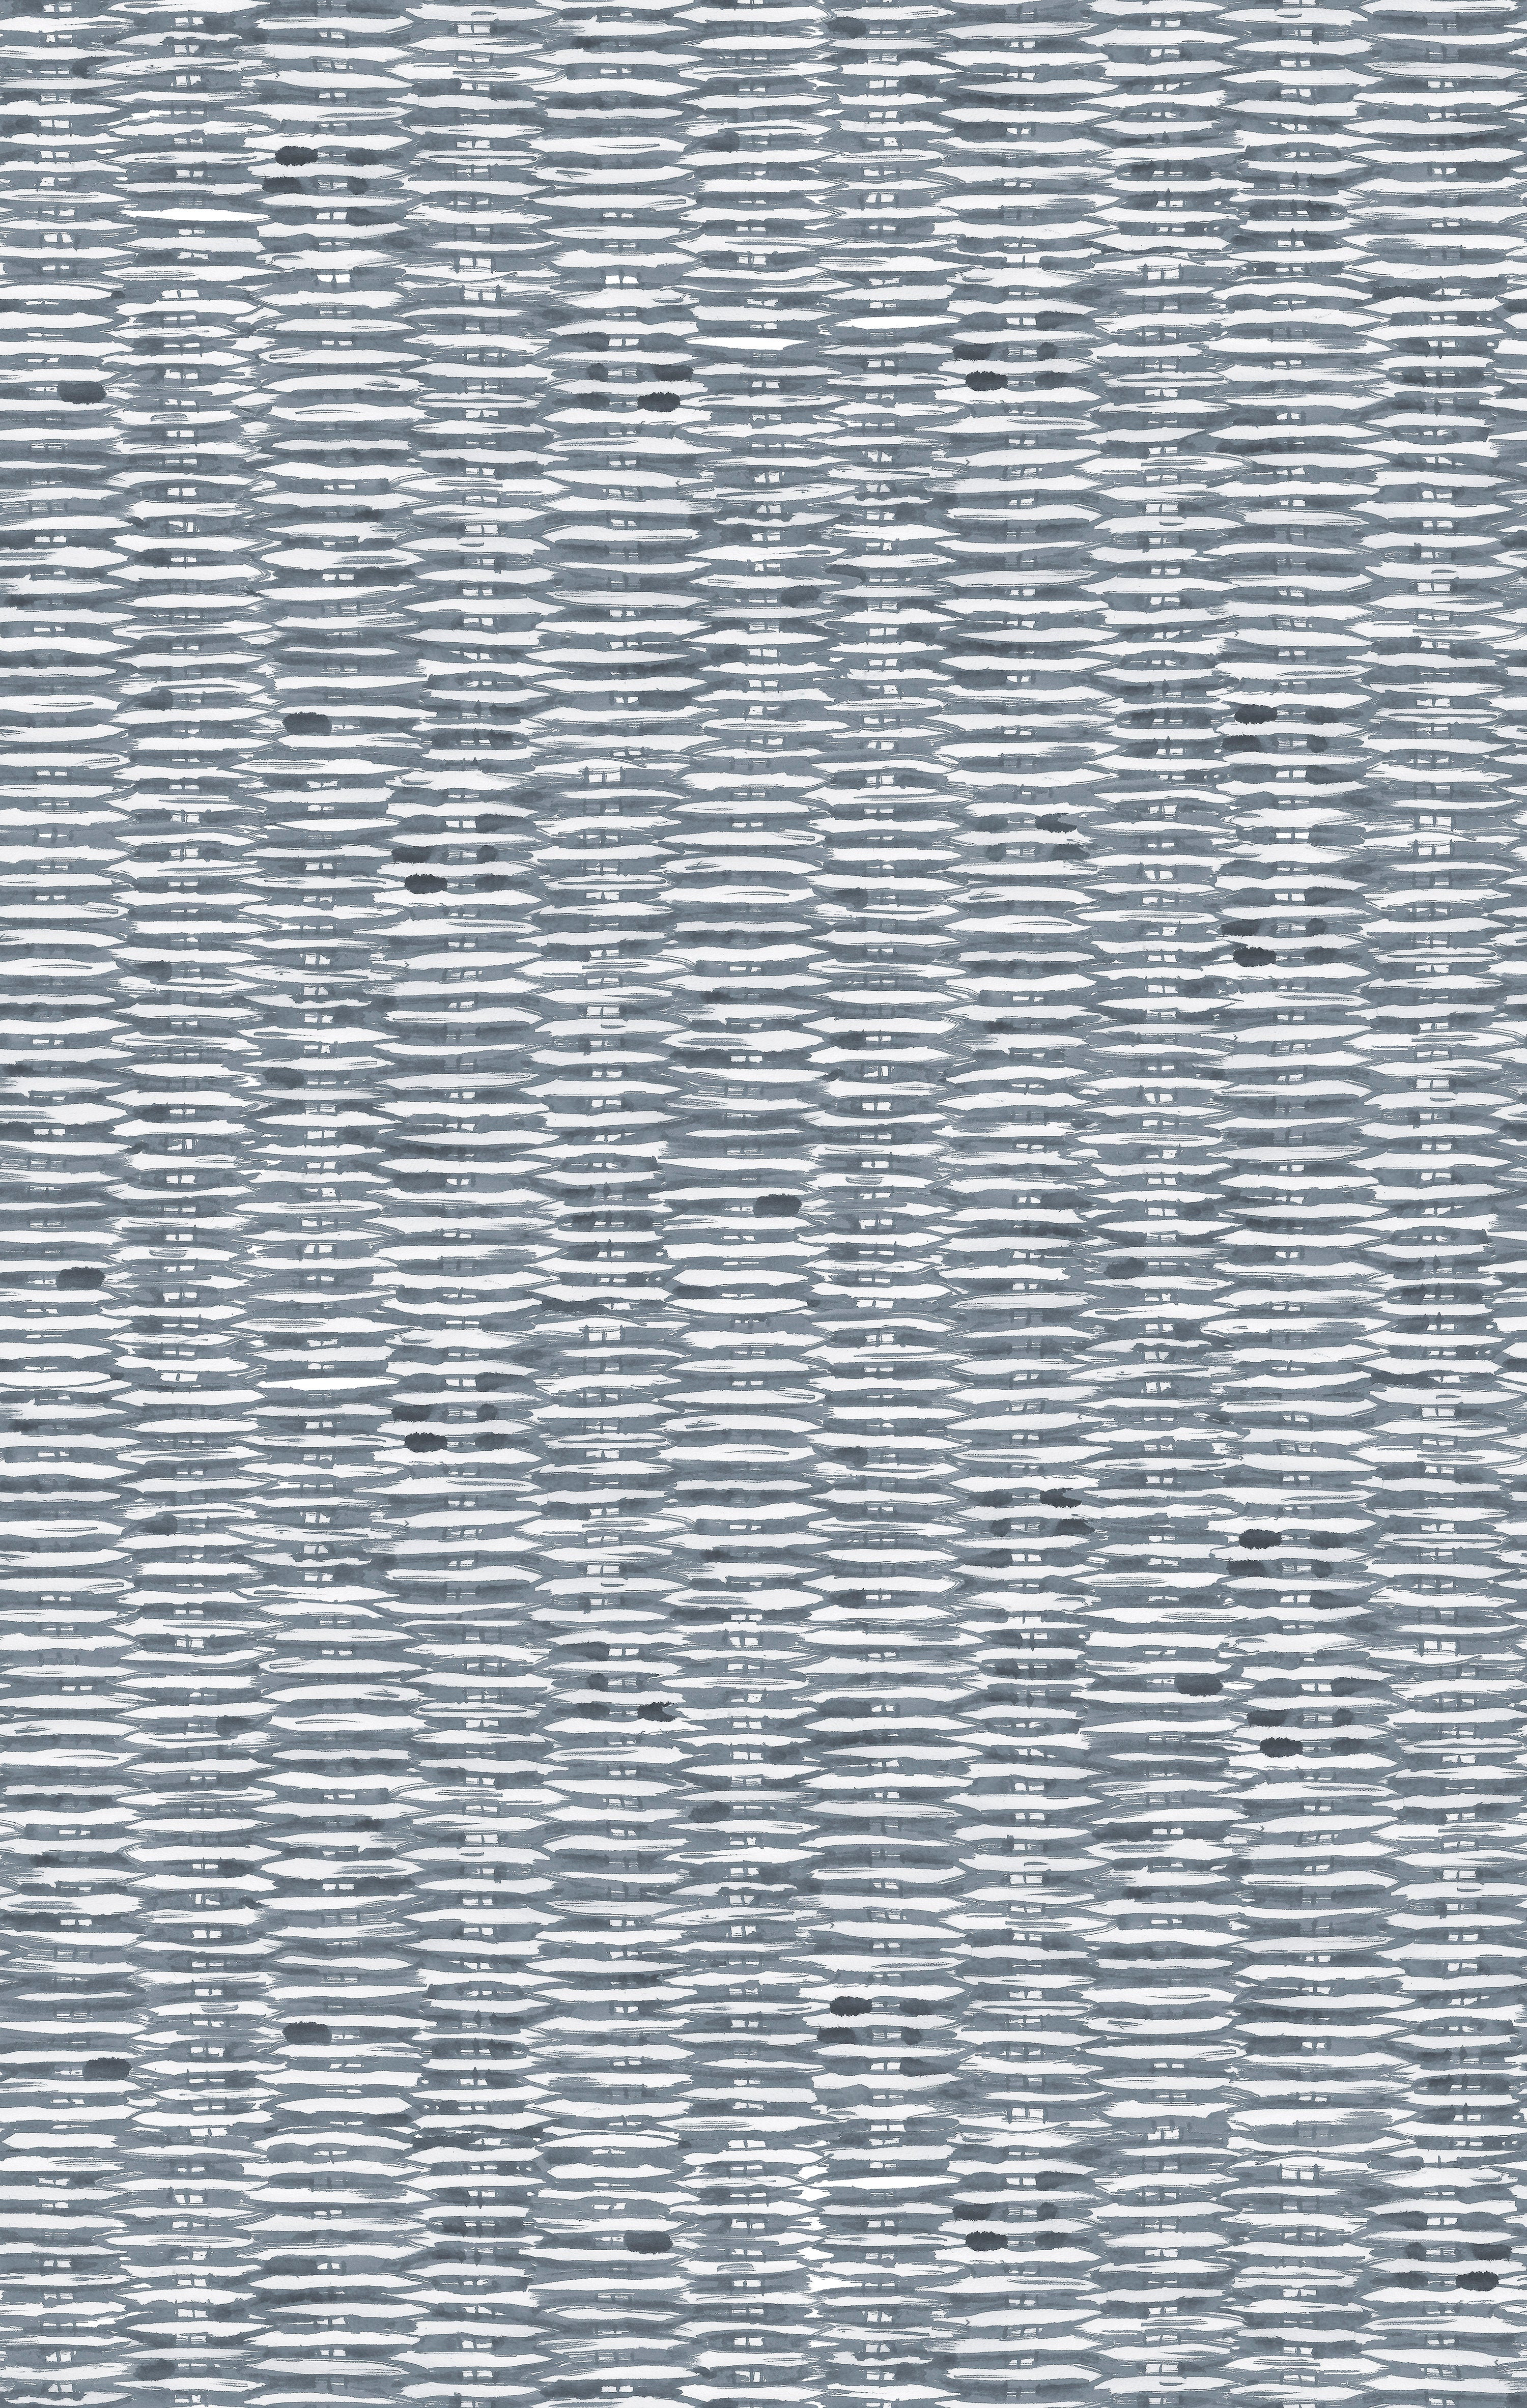 Detail of wallpaper in a textural checked print in navy on a white field.